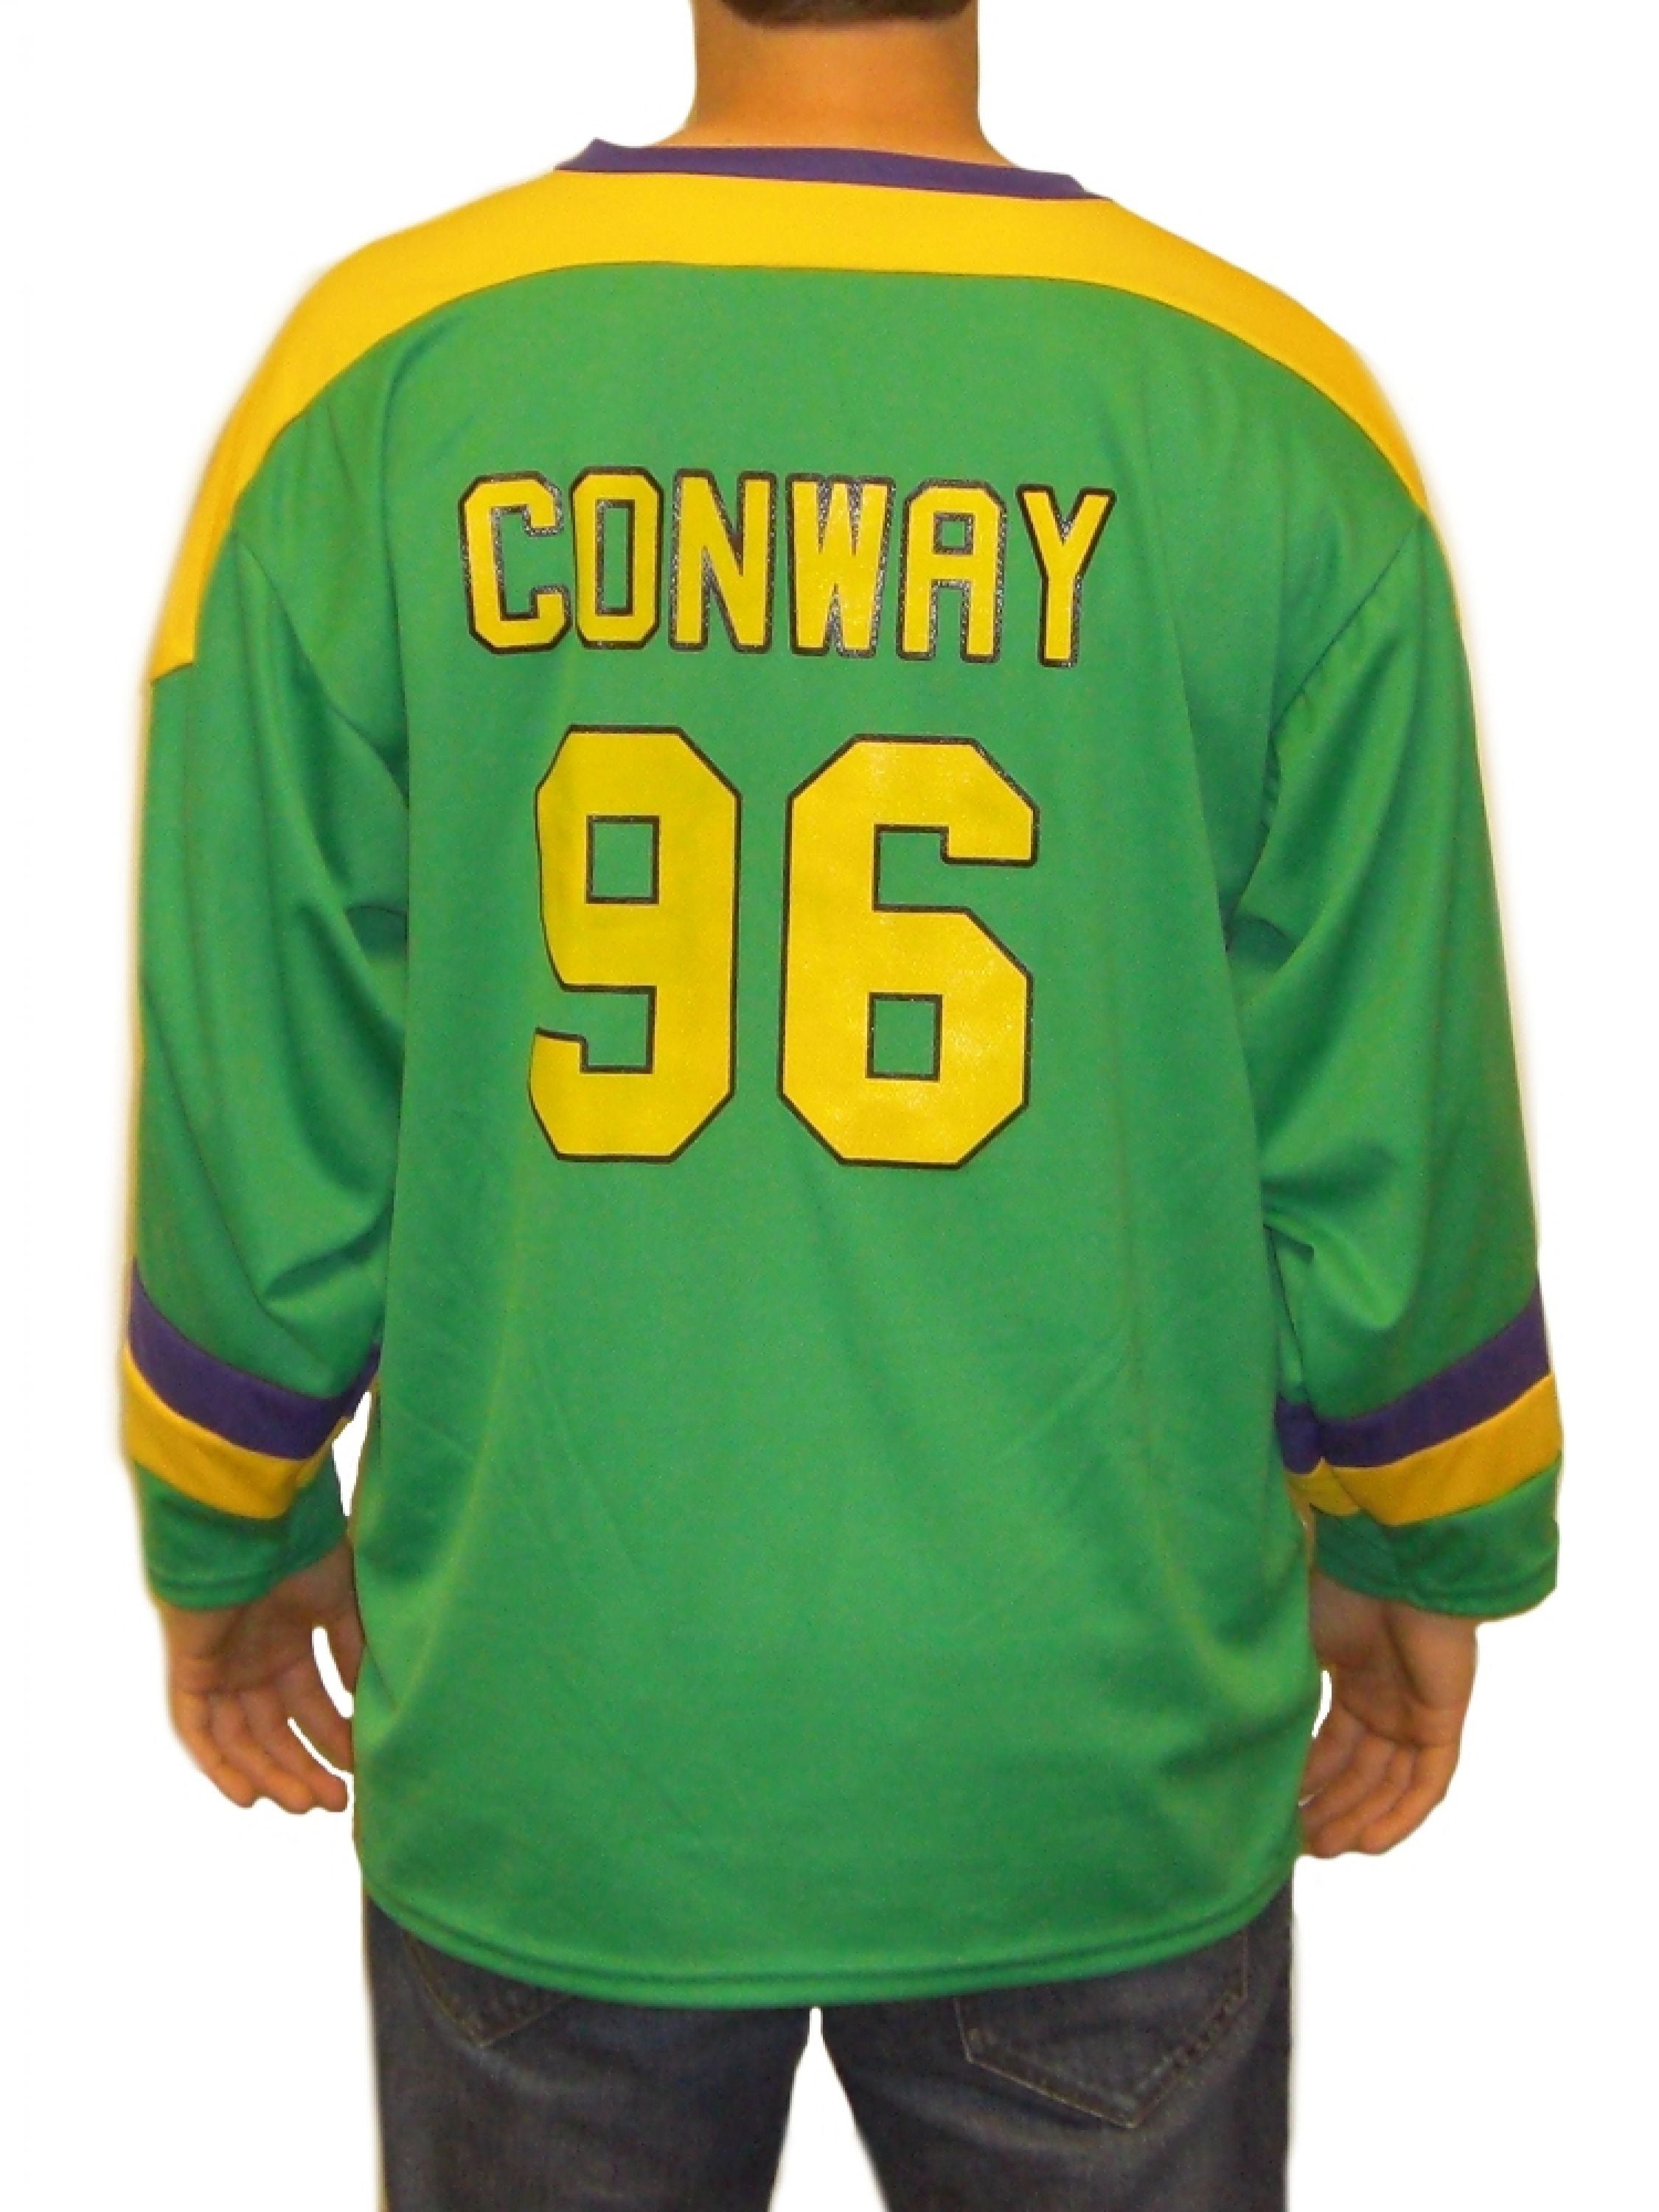 mighty ducks jersey outfit